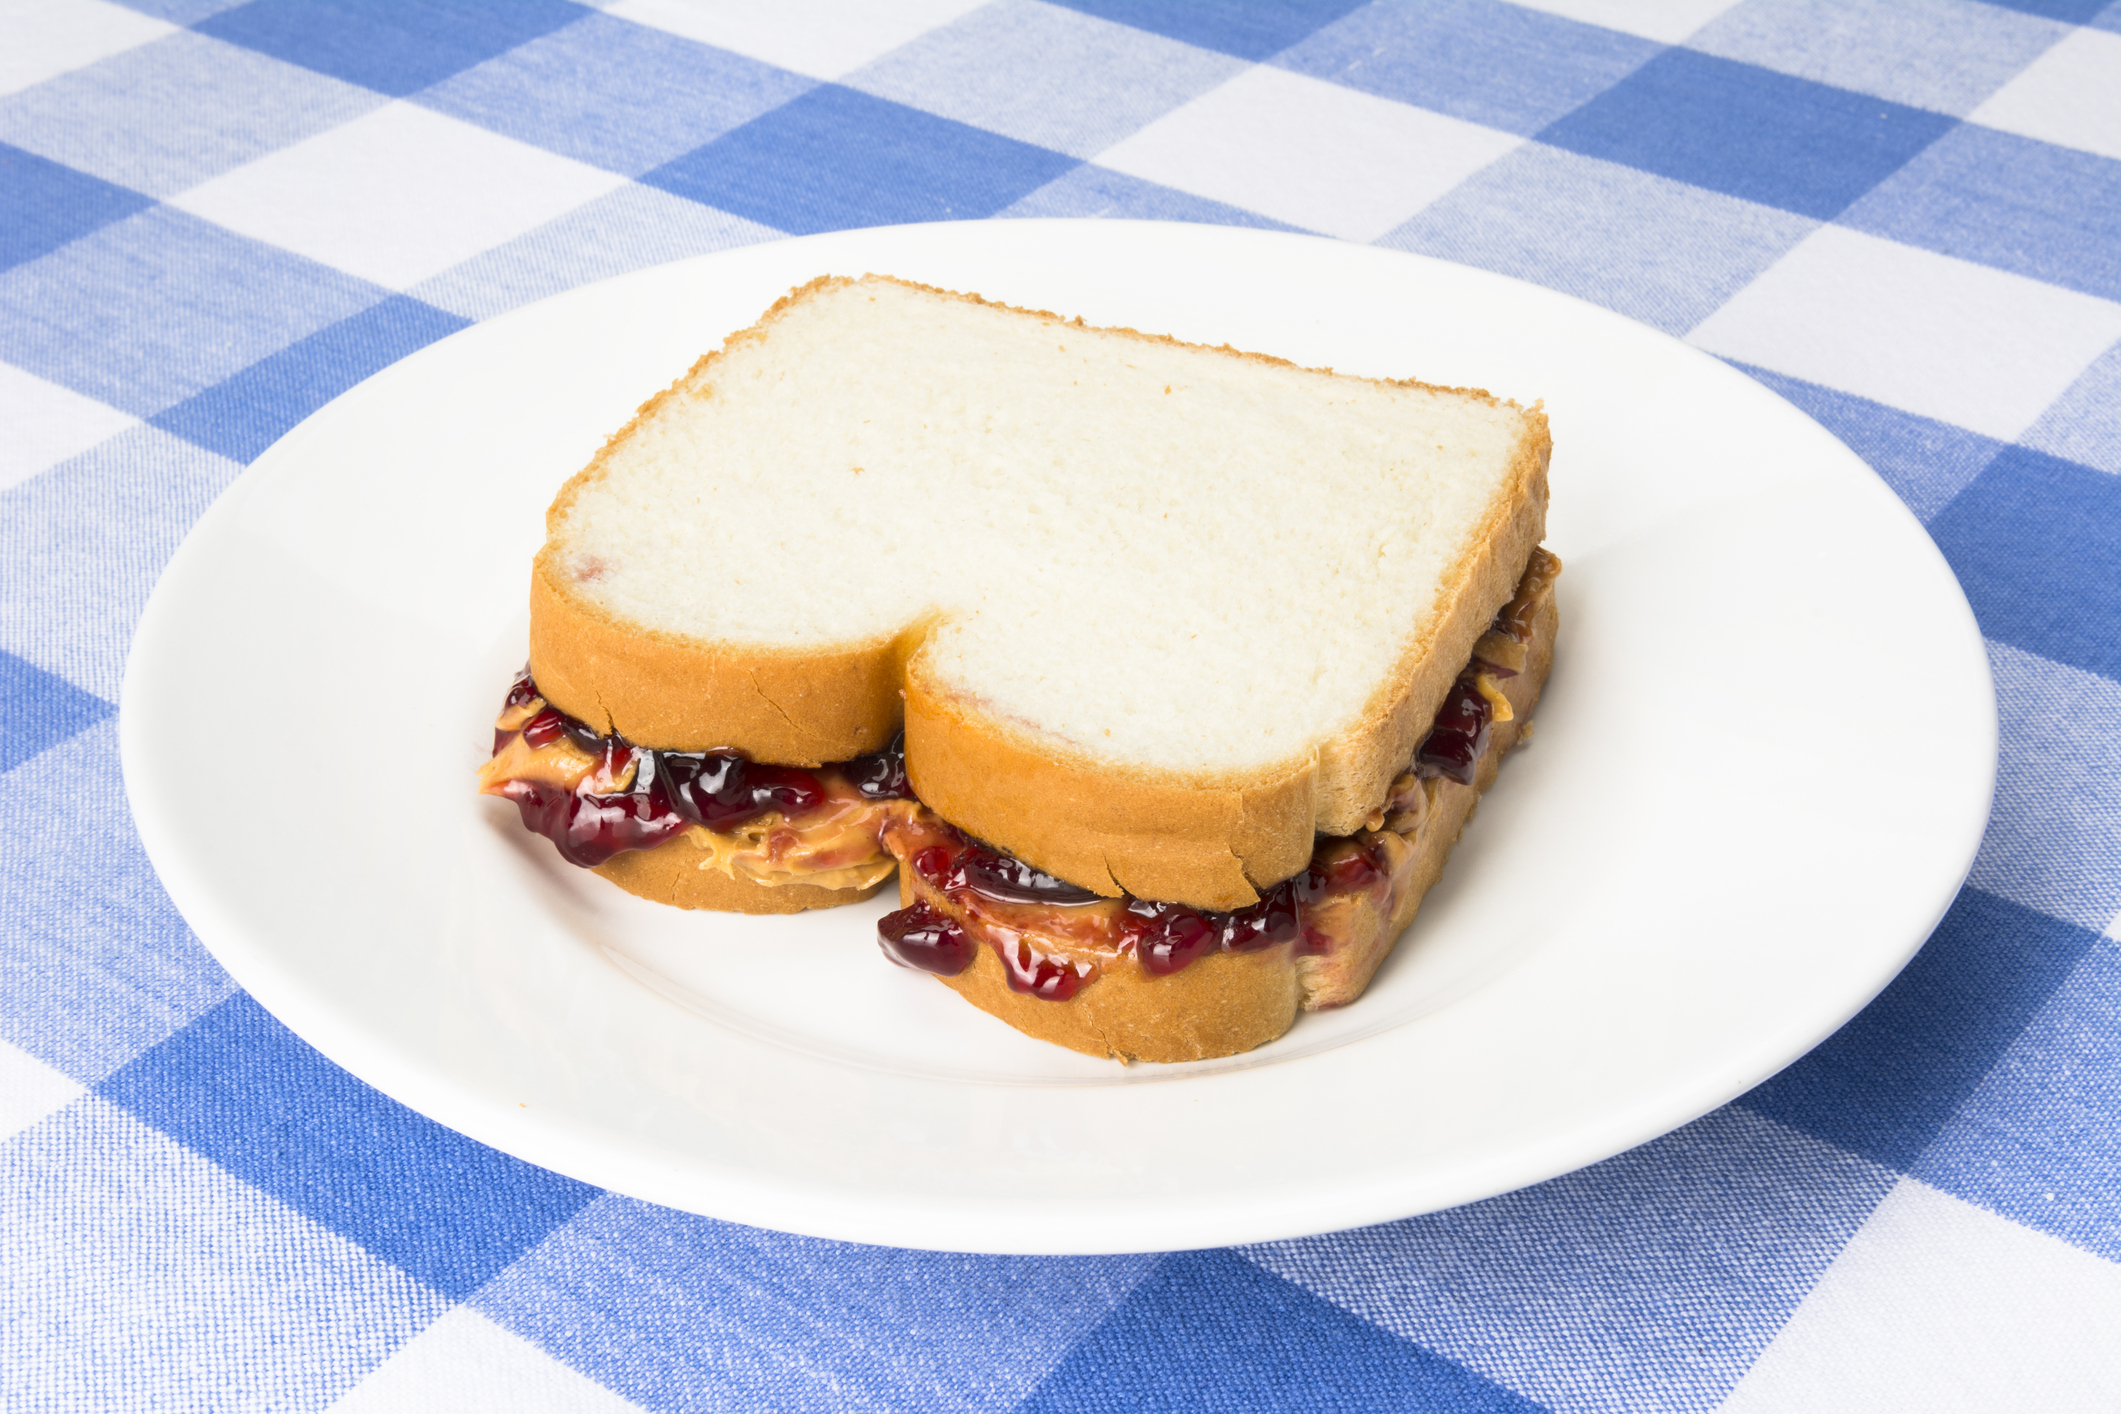 How Do You Make A Peanut Butter And Jelly Sandwich Twitter Has Opinions